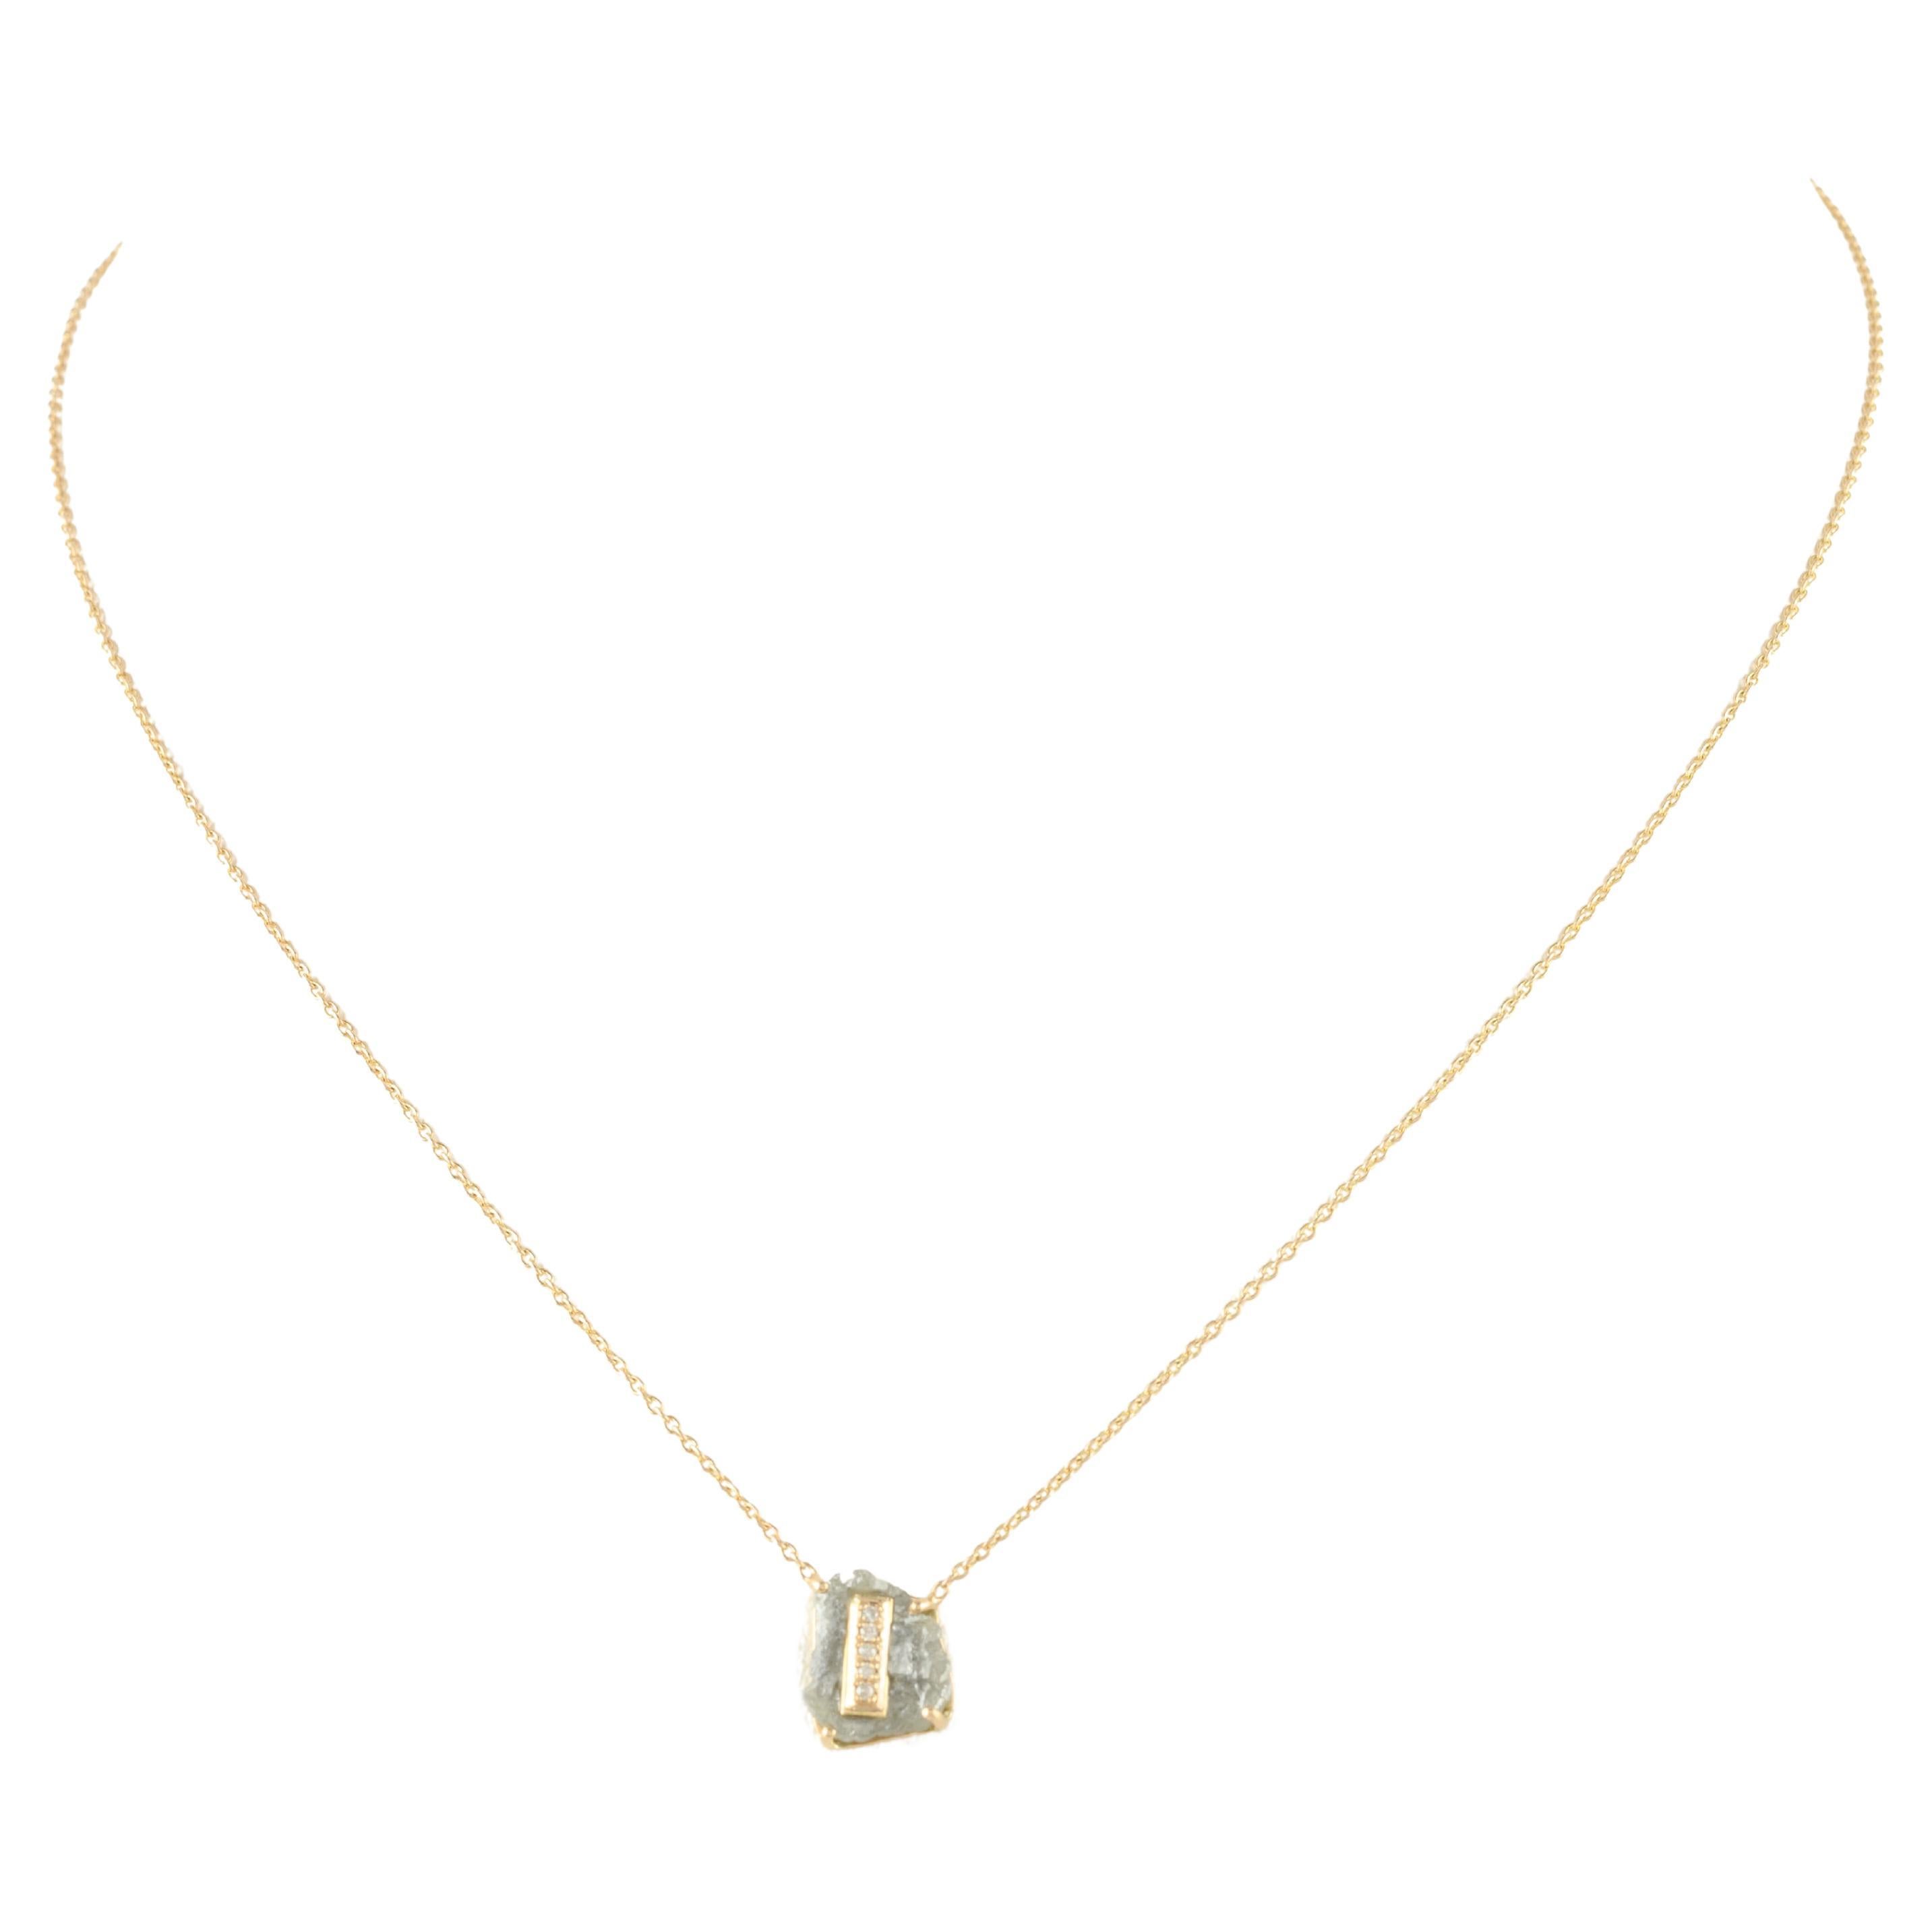 18k Solid Yellow Gold Fine Diamond "I" Initial Pendant Necklace Gift For Her For Sale